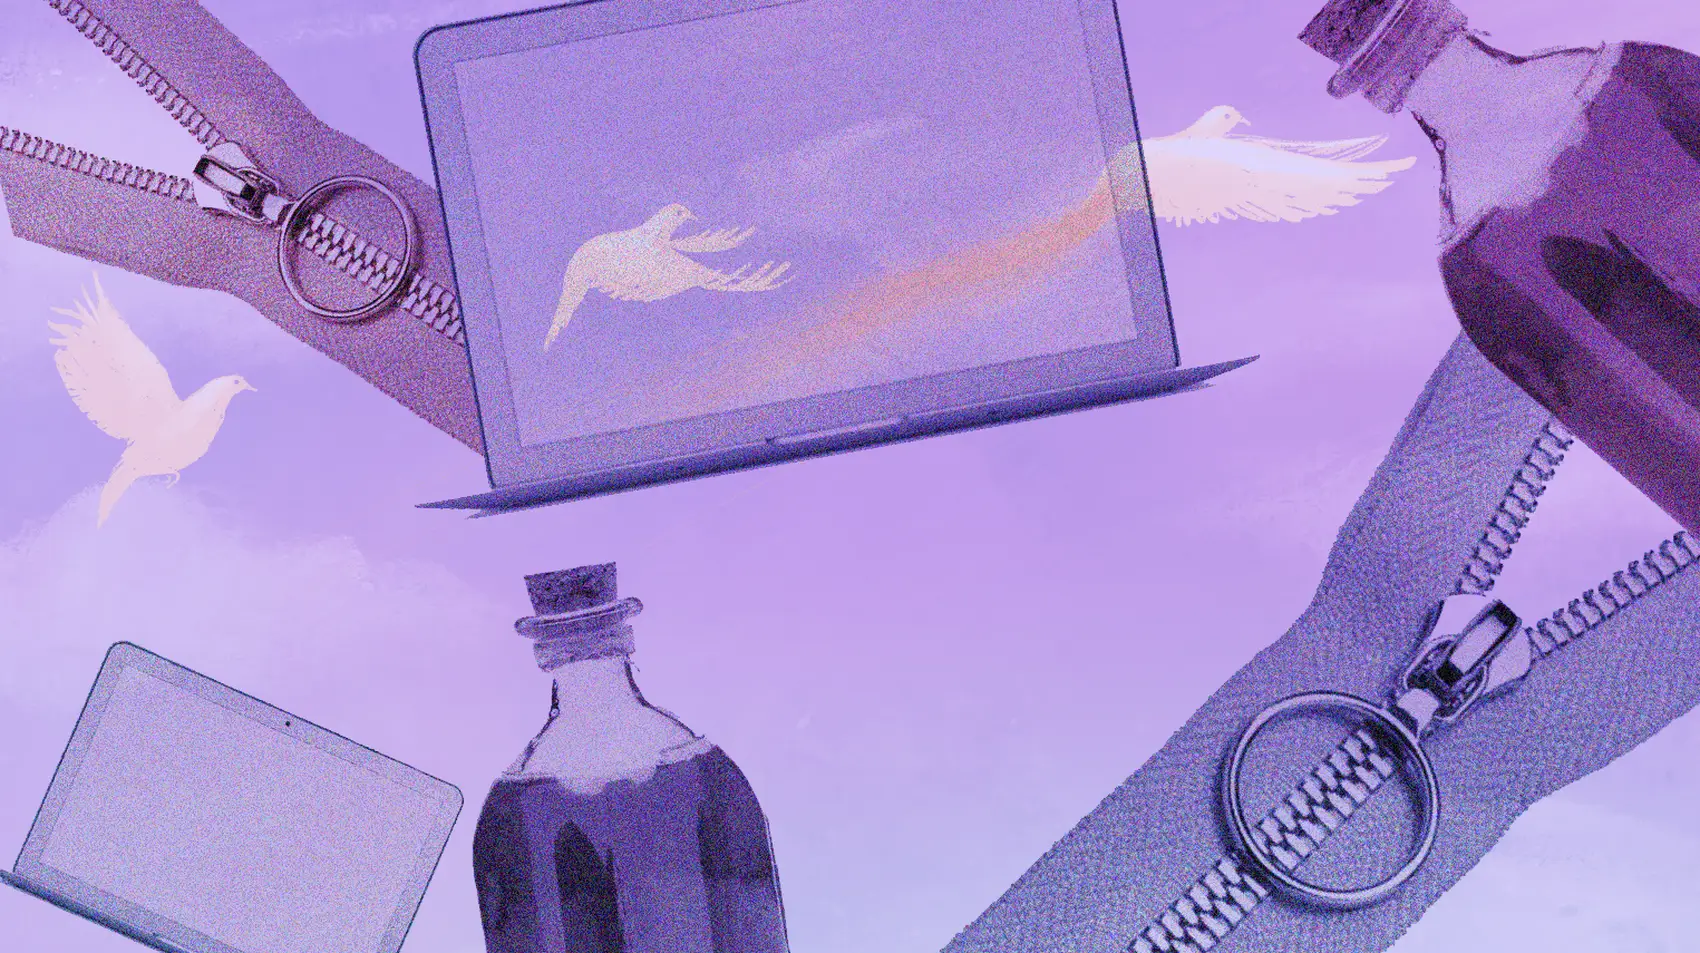 Cover image of floating laptops, purple liquid filled bottles and zippers.